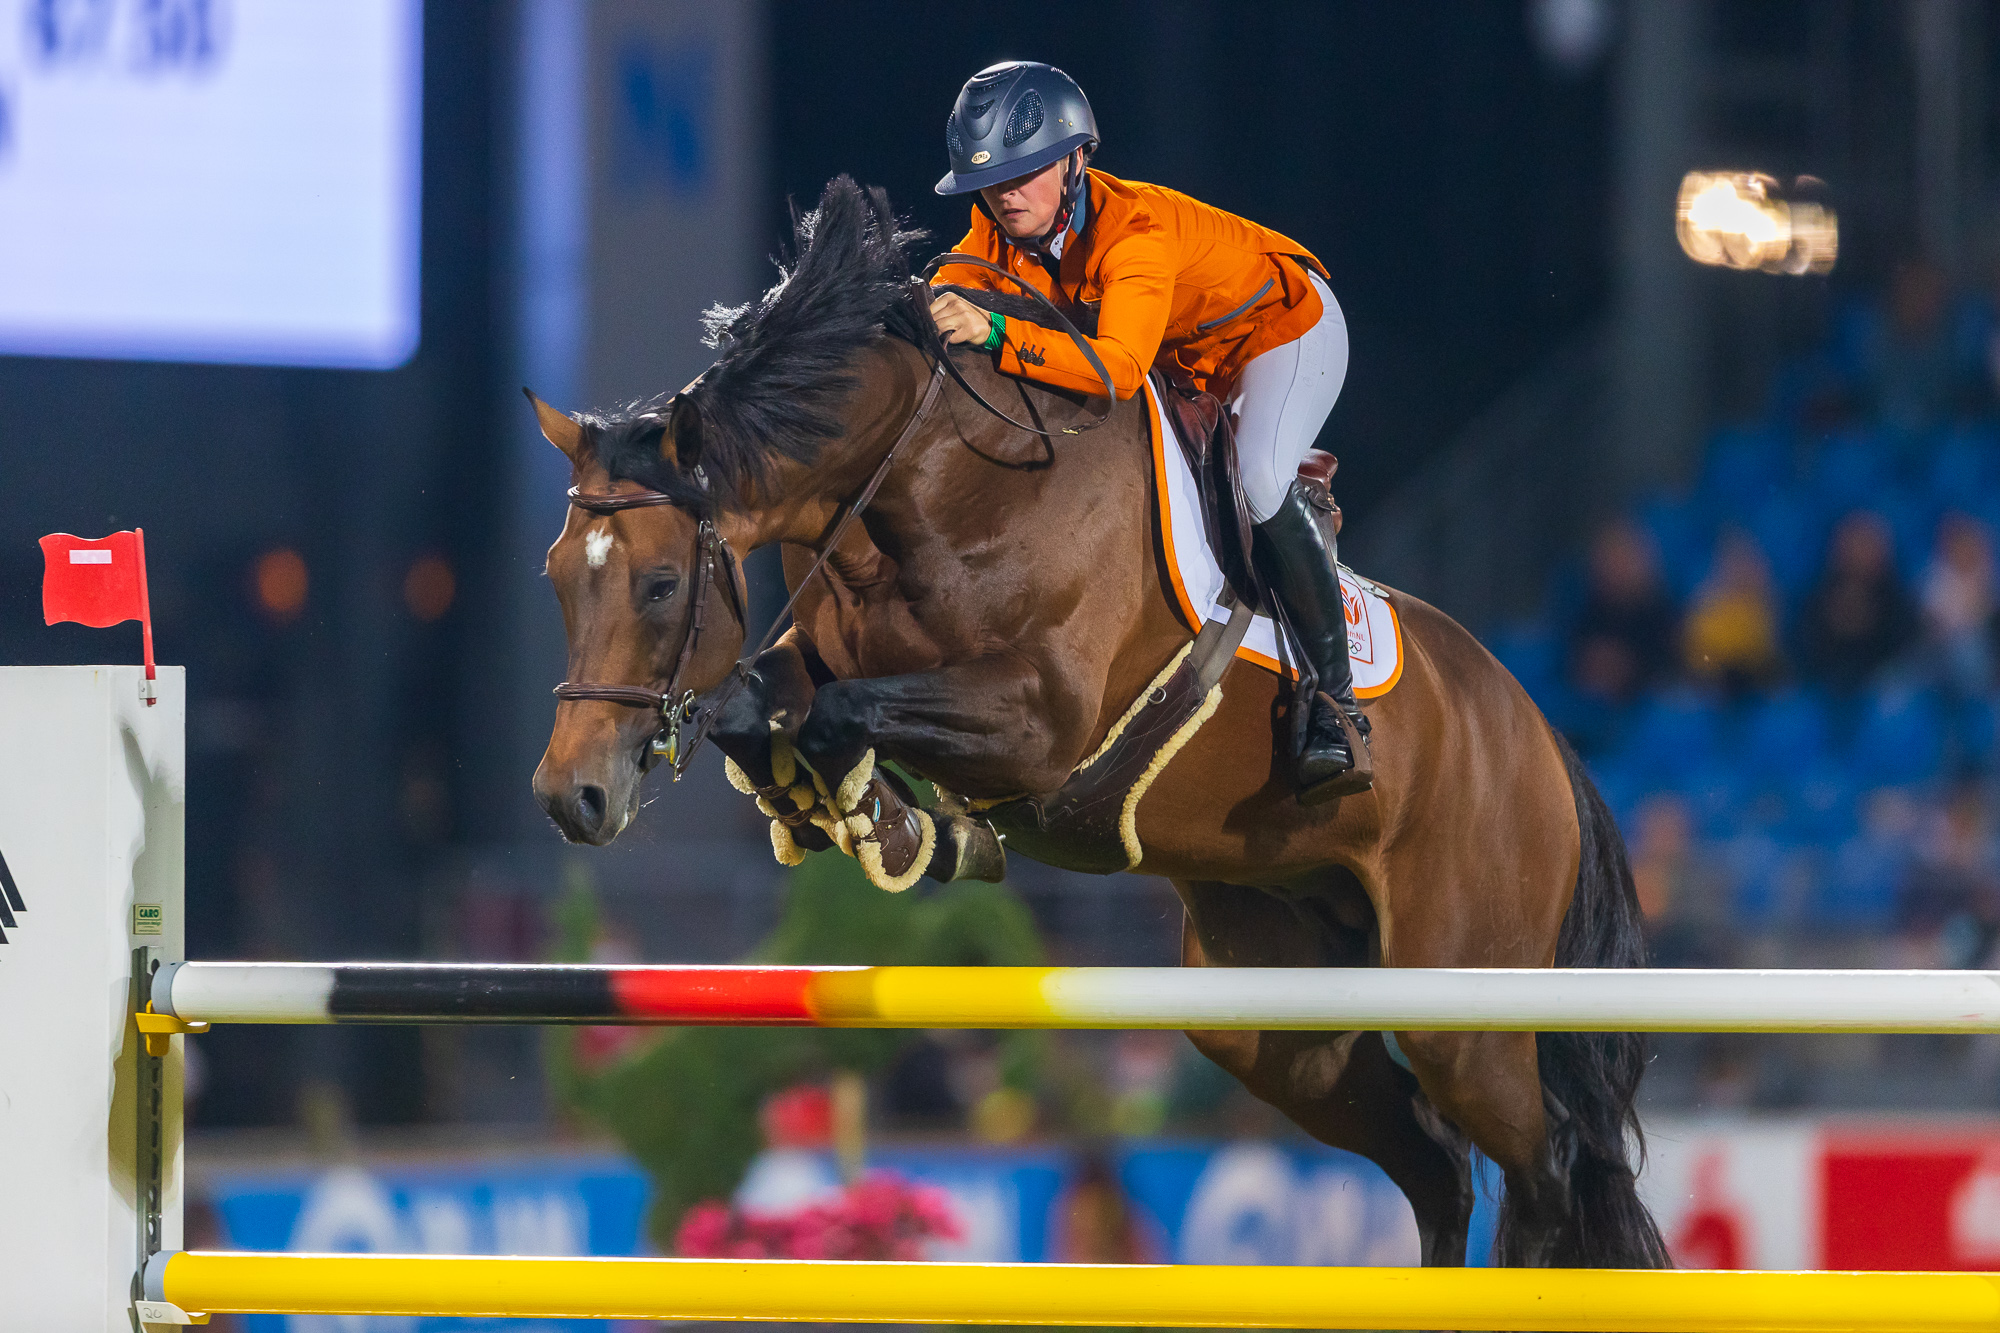 CHIO Aachen: Sanne Thijssen is the fastest over a height of 1m45